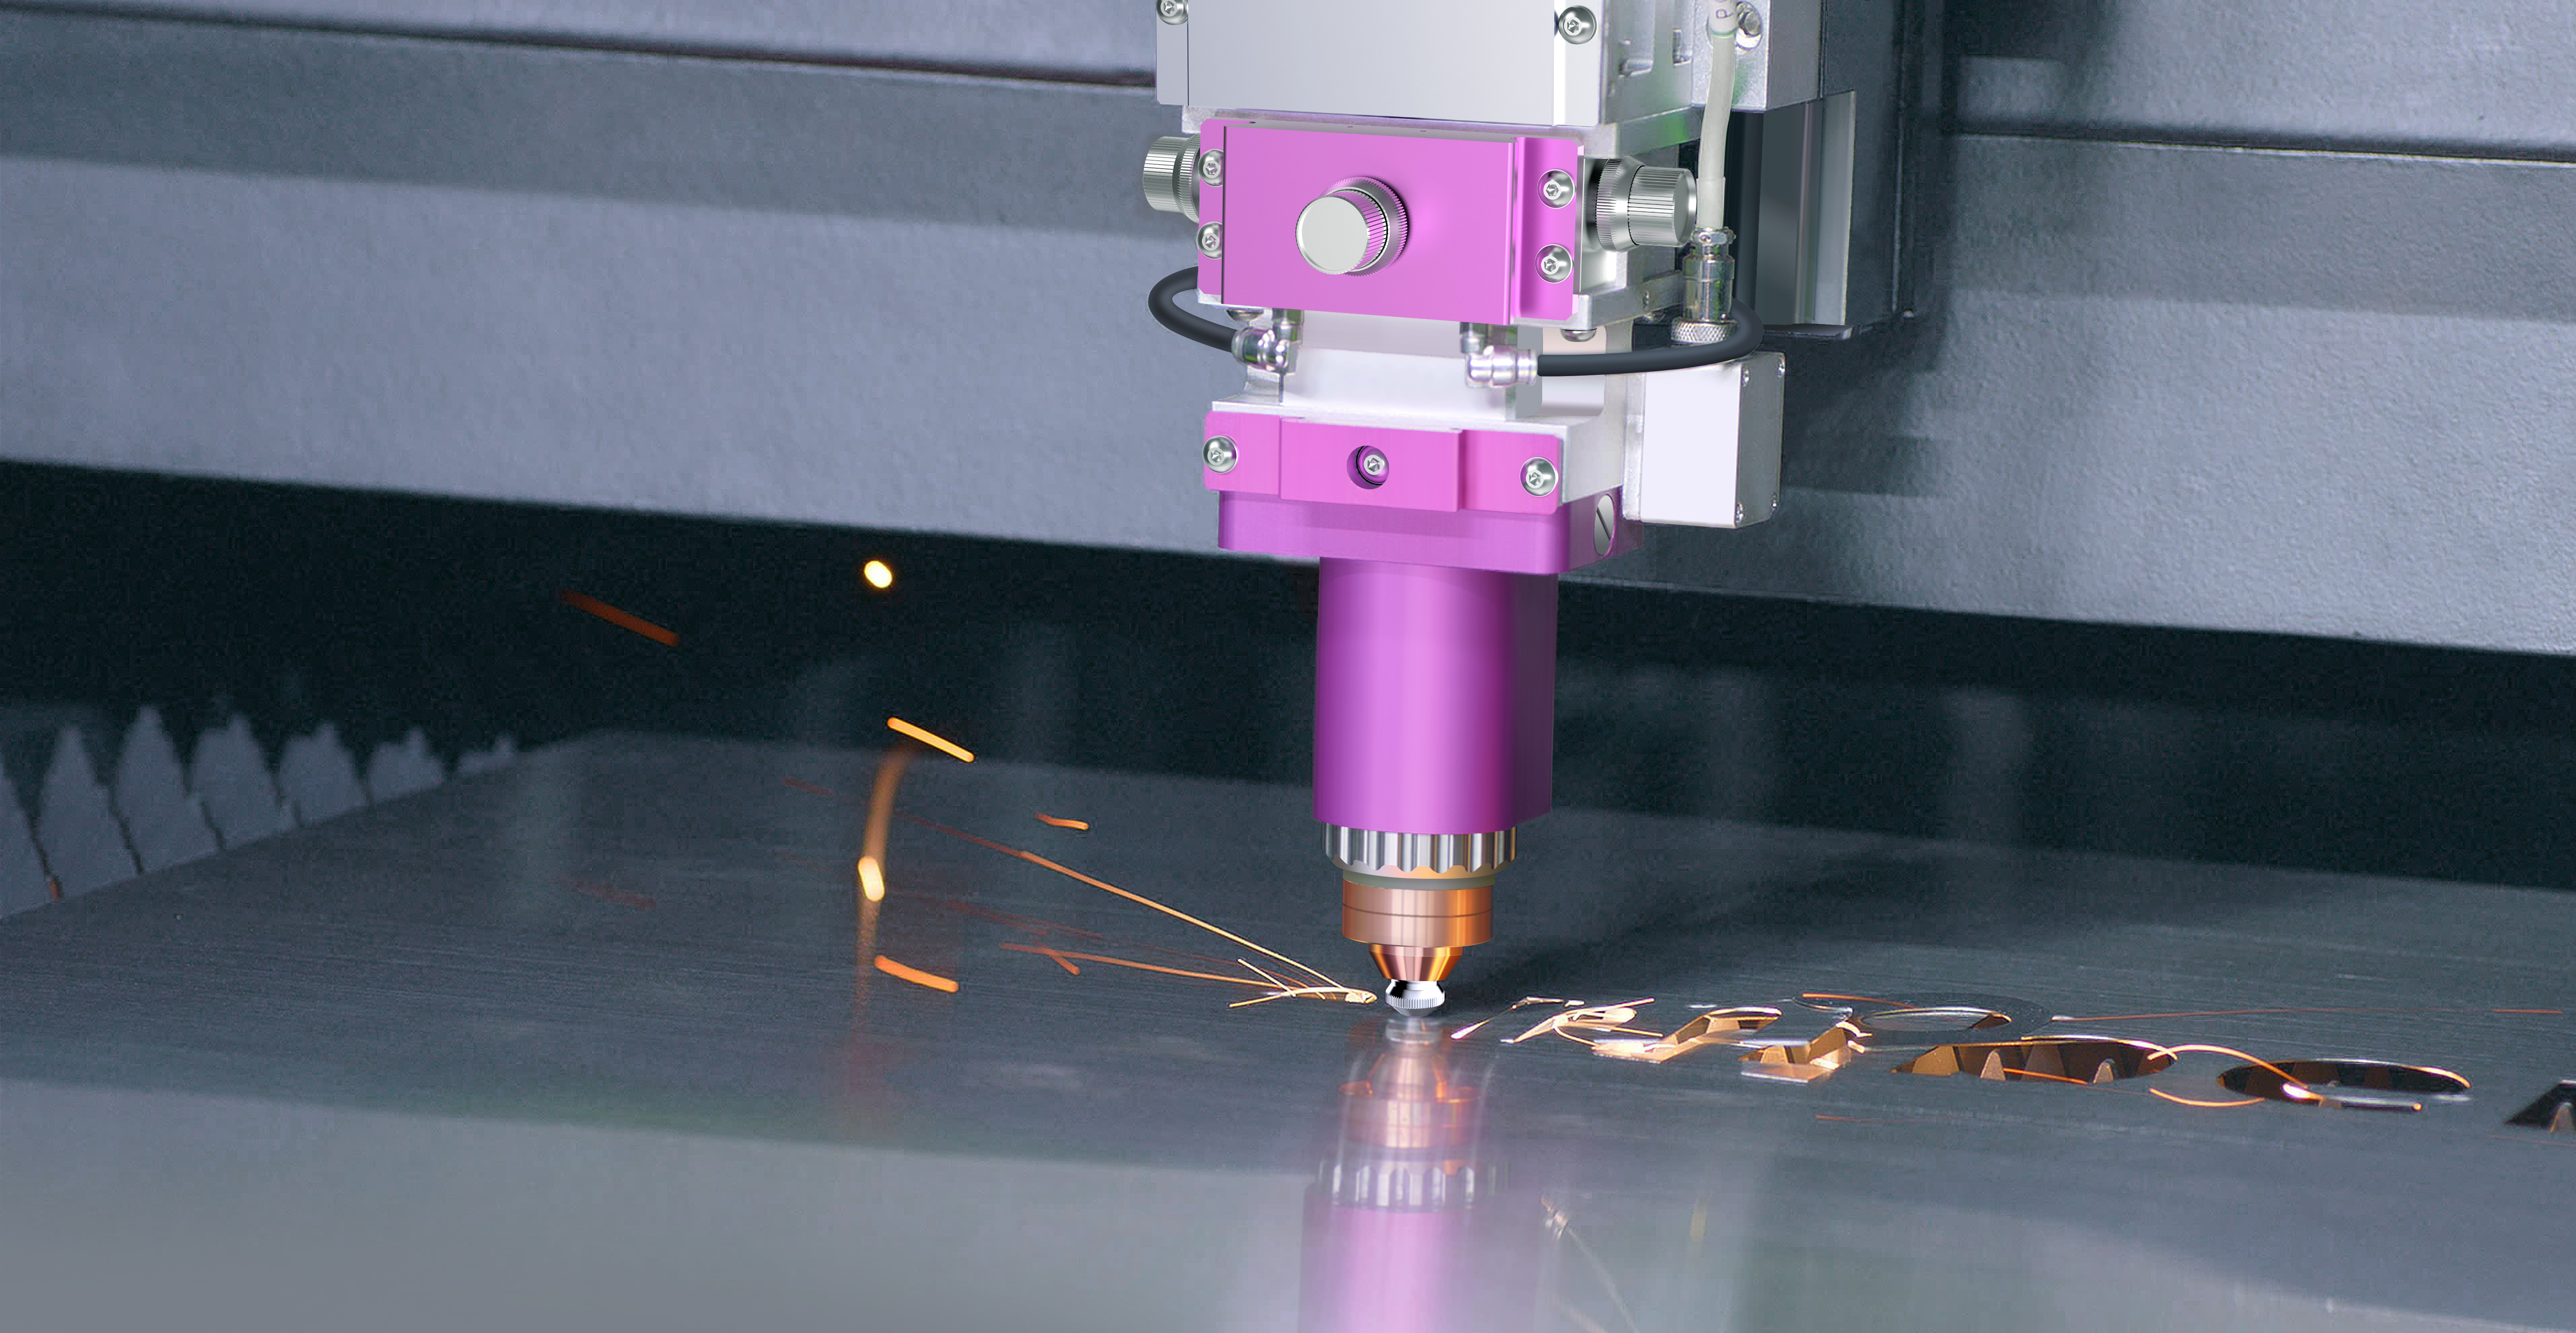 The principle, function and application analysis of 3D laser cutting machine